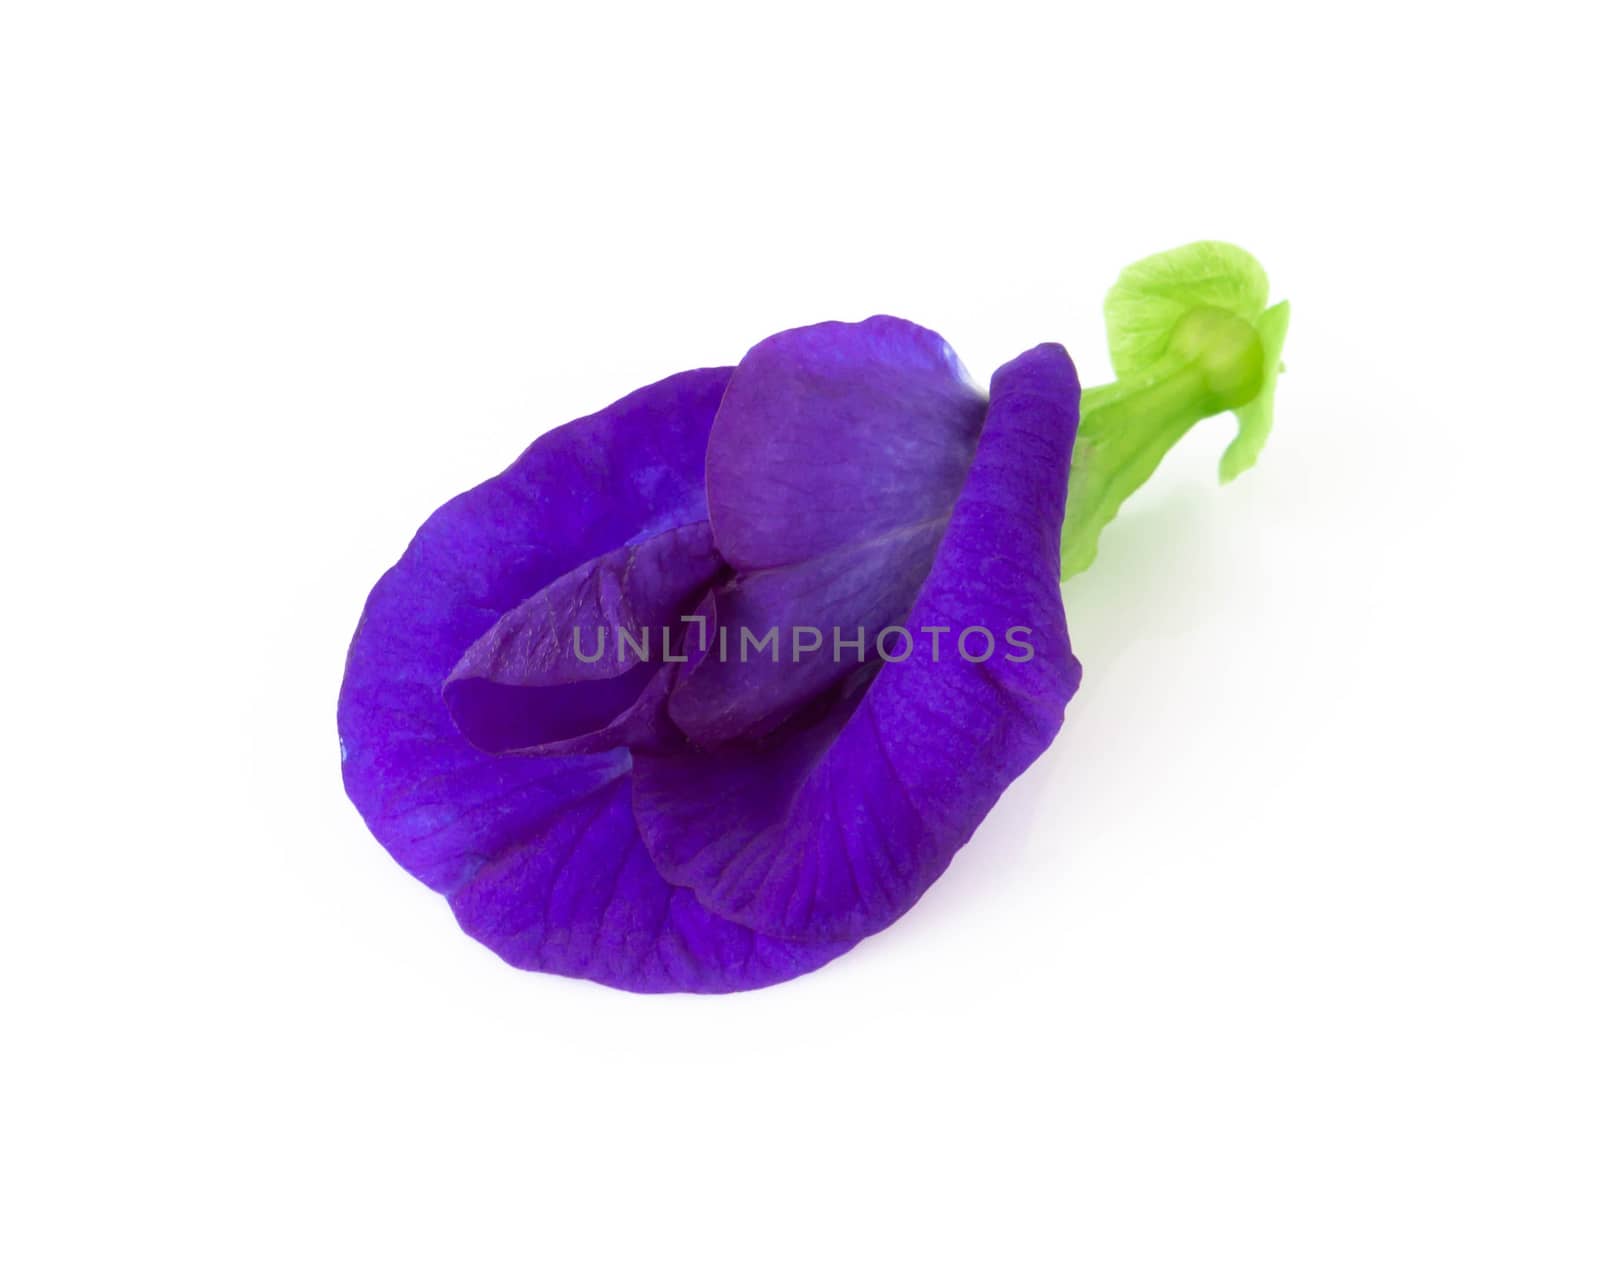 Butterfly pea flower on white background, herb and medical conce by pt.pongsak@gmail.com